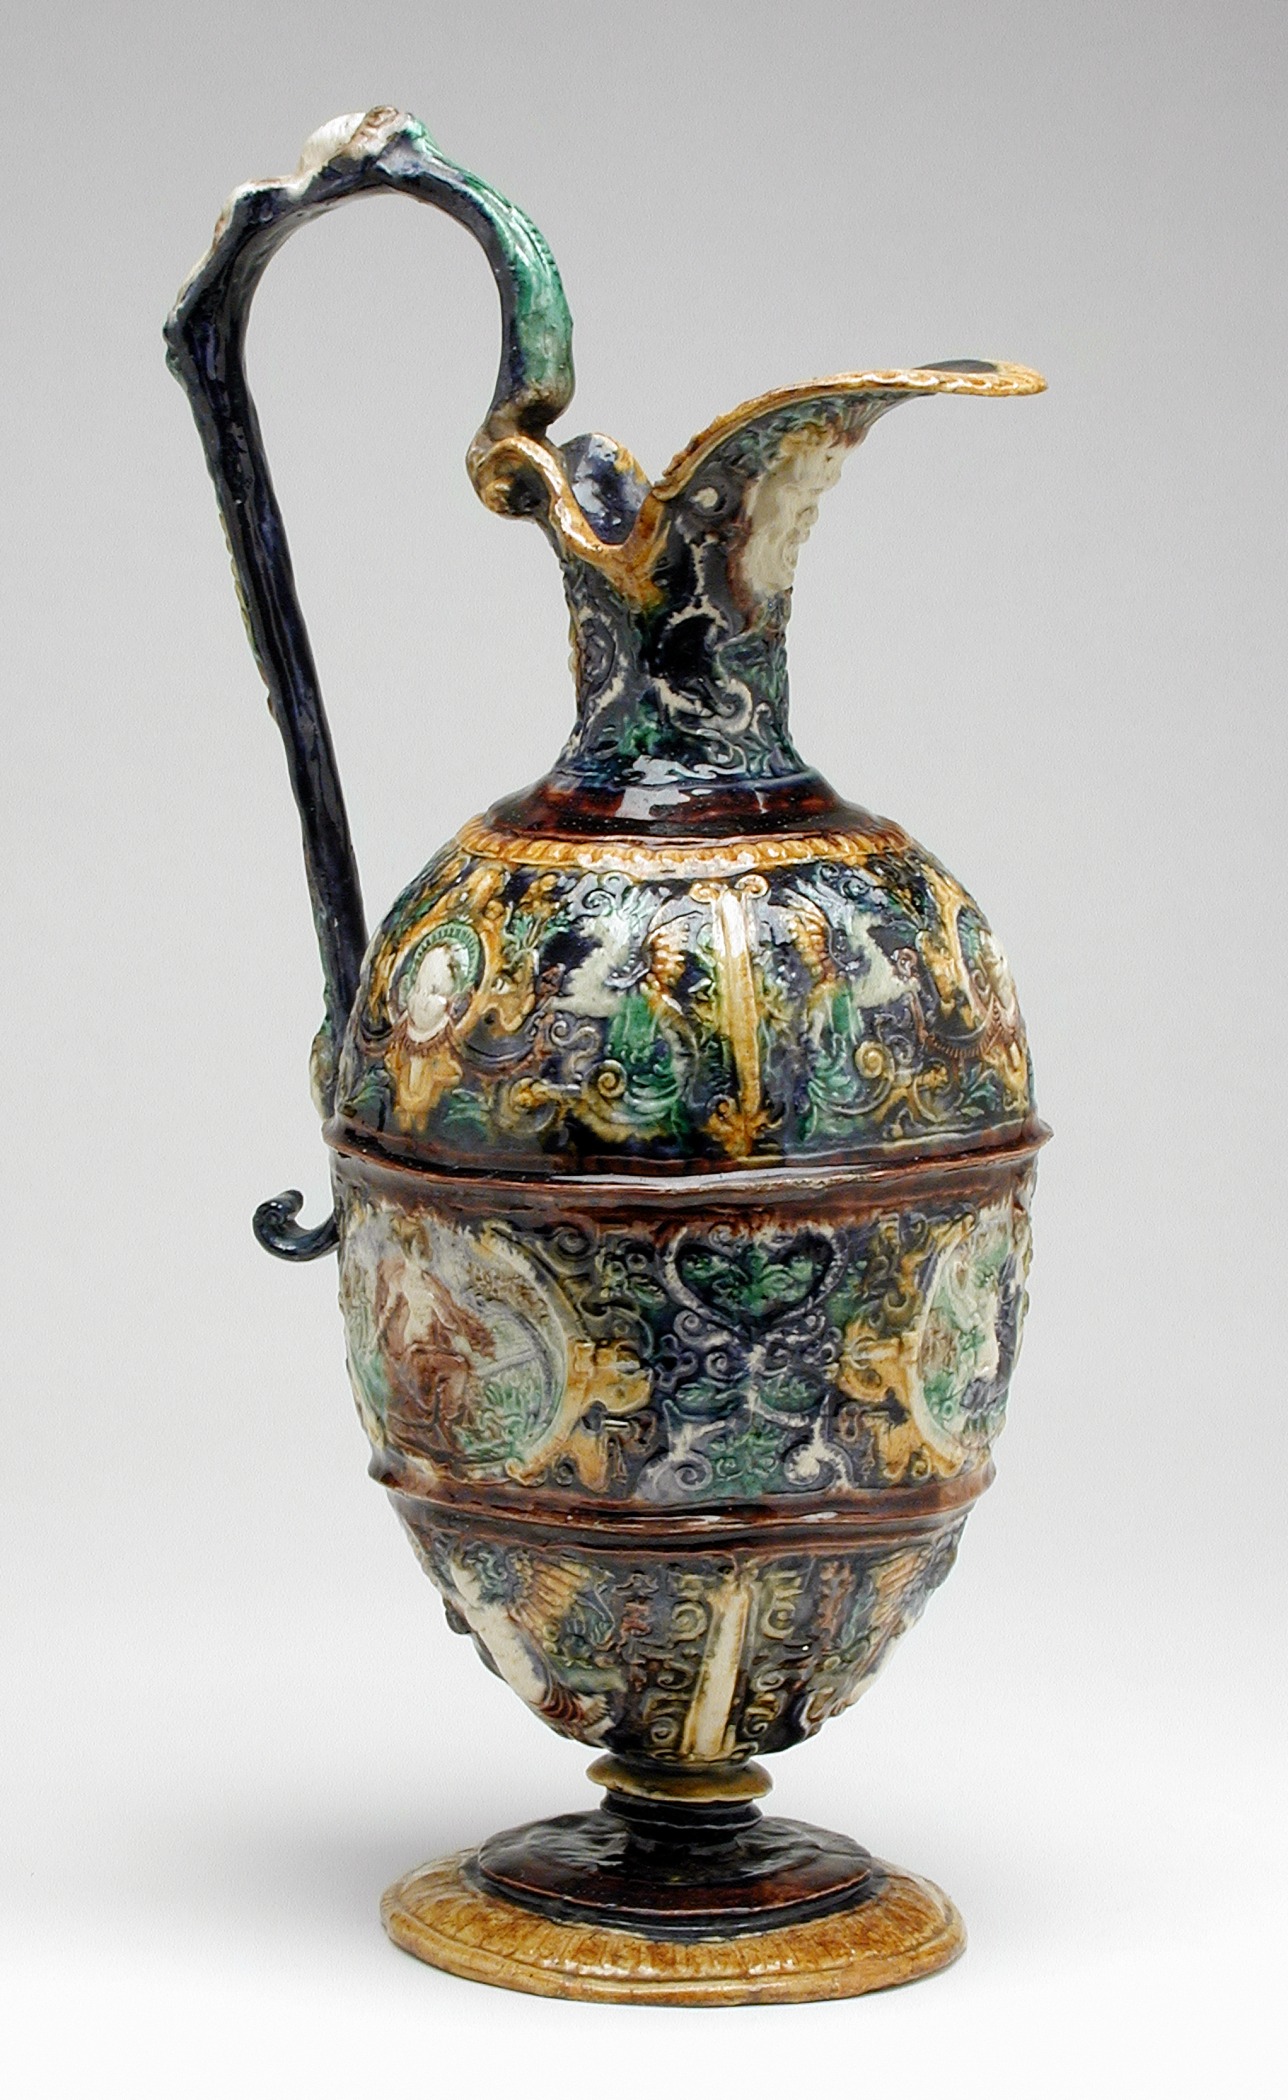 a large vase with two handles has paintings on the outside of it